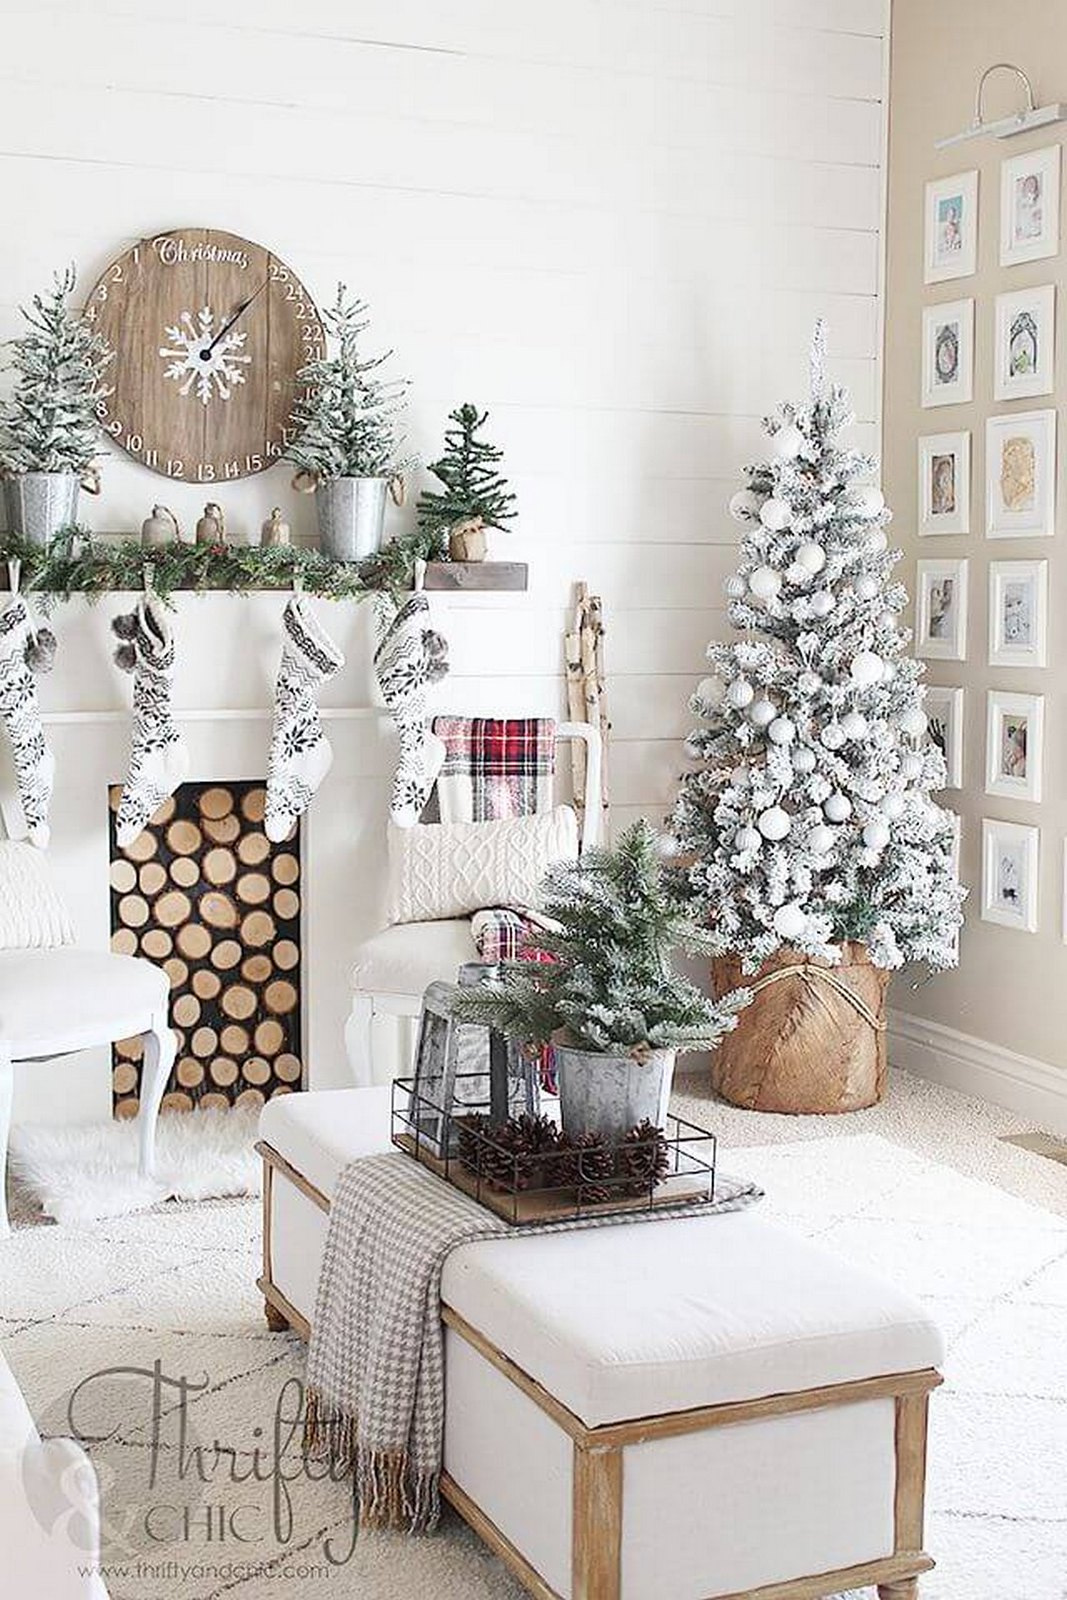 10 Ways to Decorate Your Christmas Tree - All White Christmas Tree